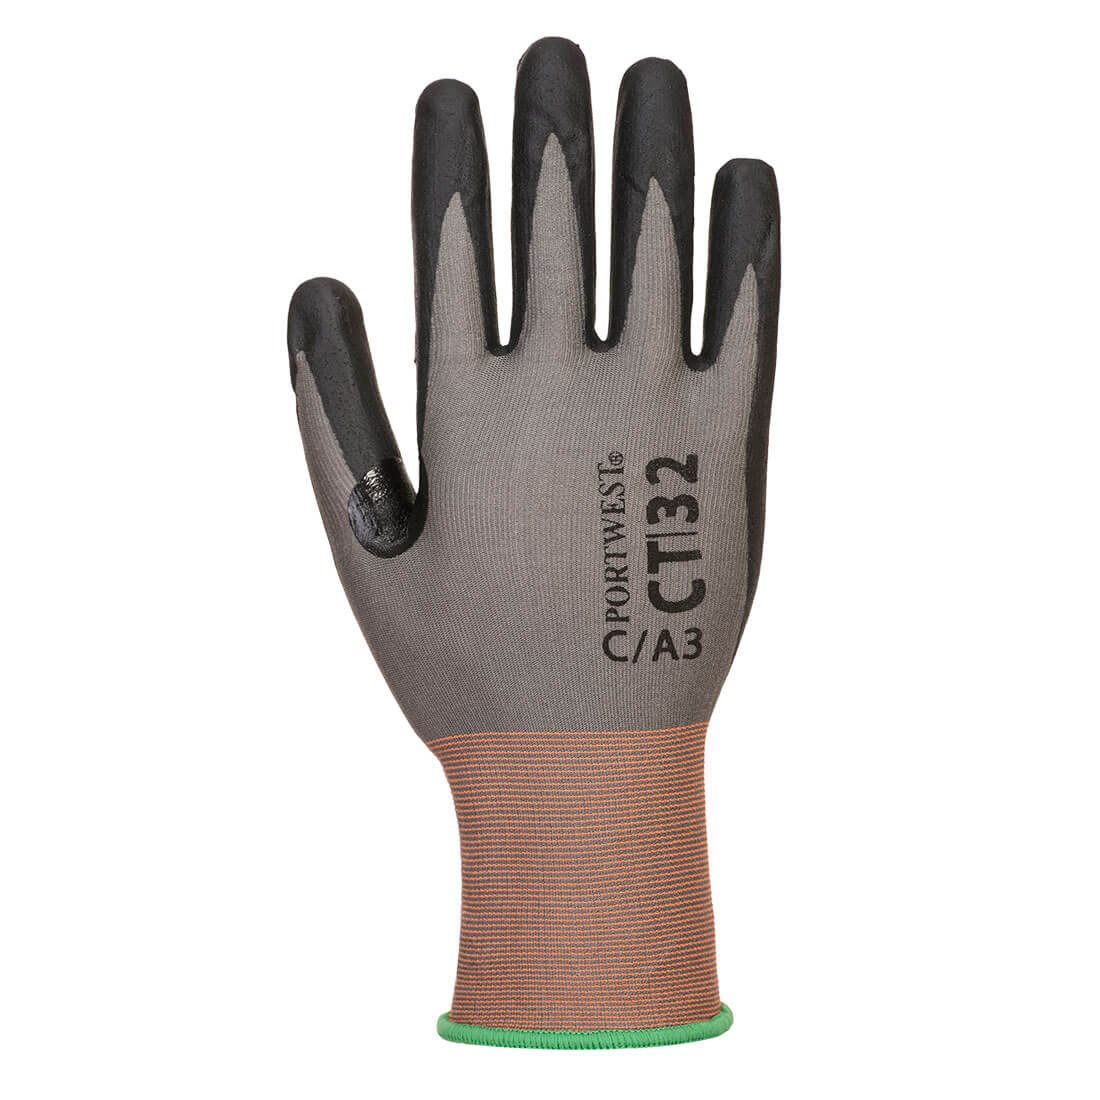 Micro Foam Nitrile Coated cut resistant hand gloves - CT32 suppliers in Hyderabad, Telangana, India